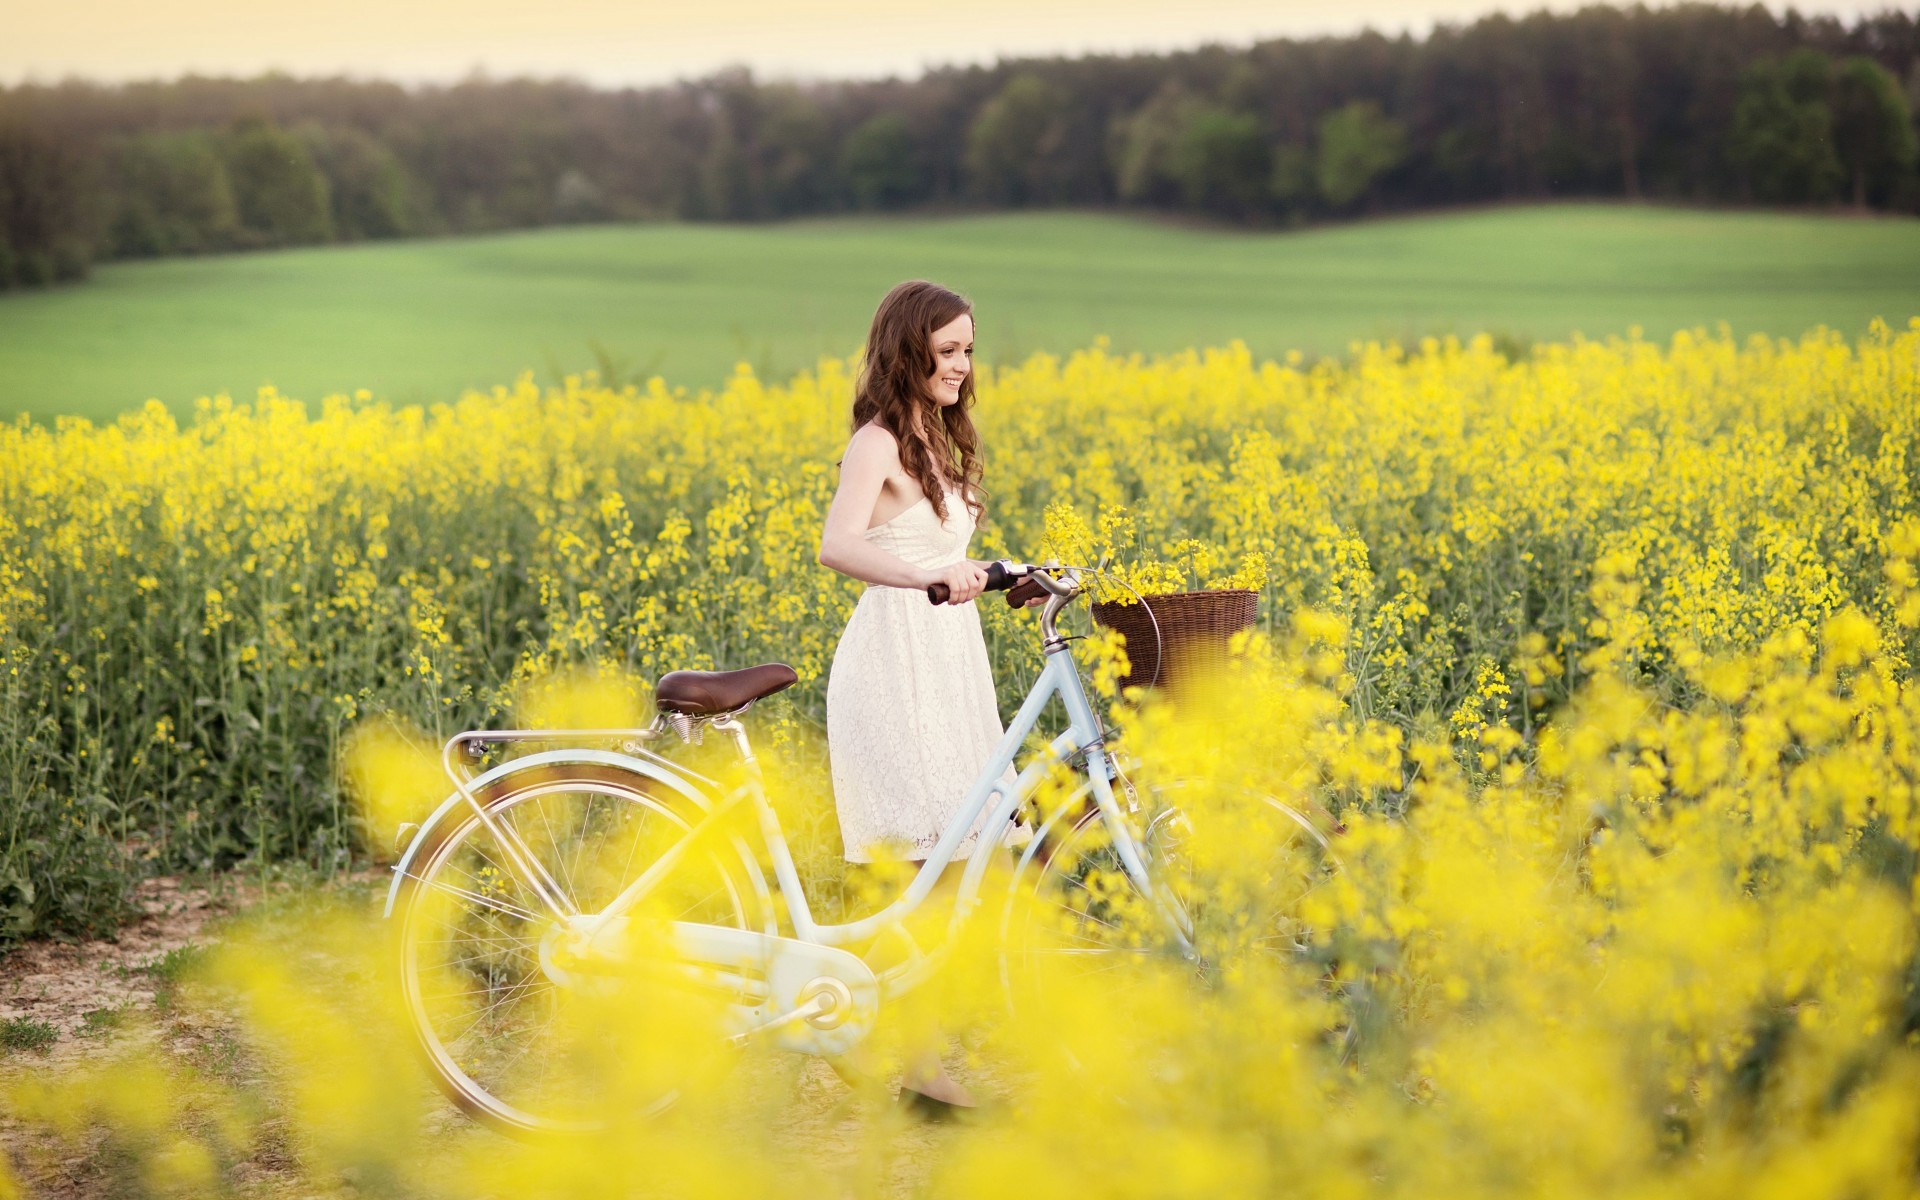 Wallpaper Flowers Field Summer Bicycle Girl With